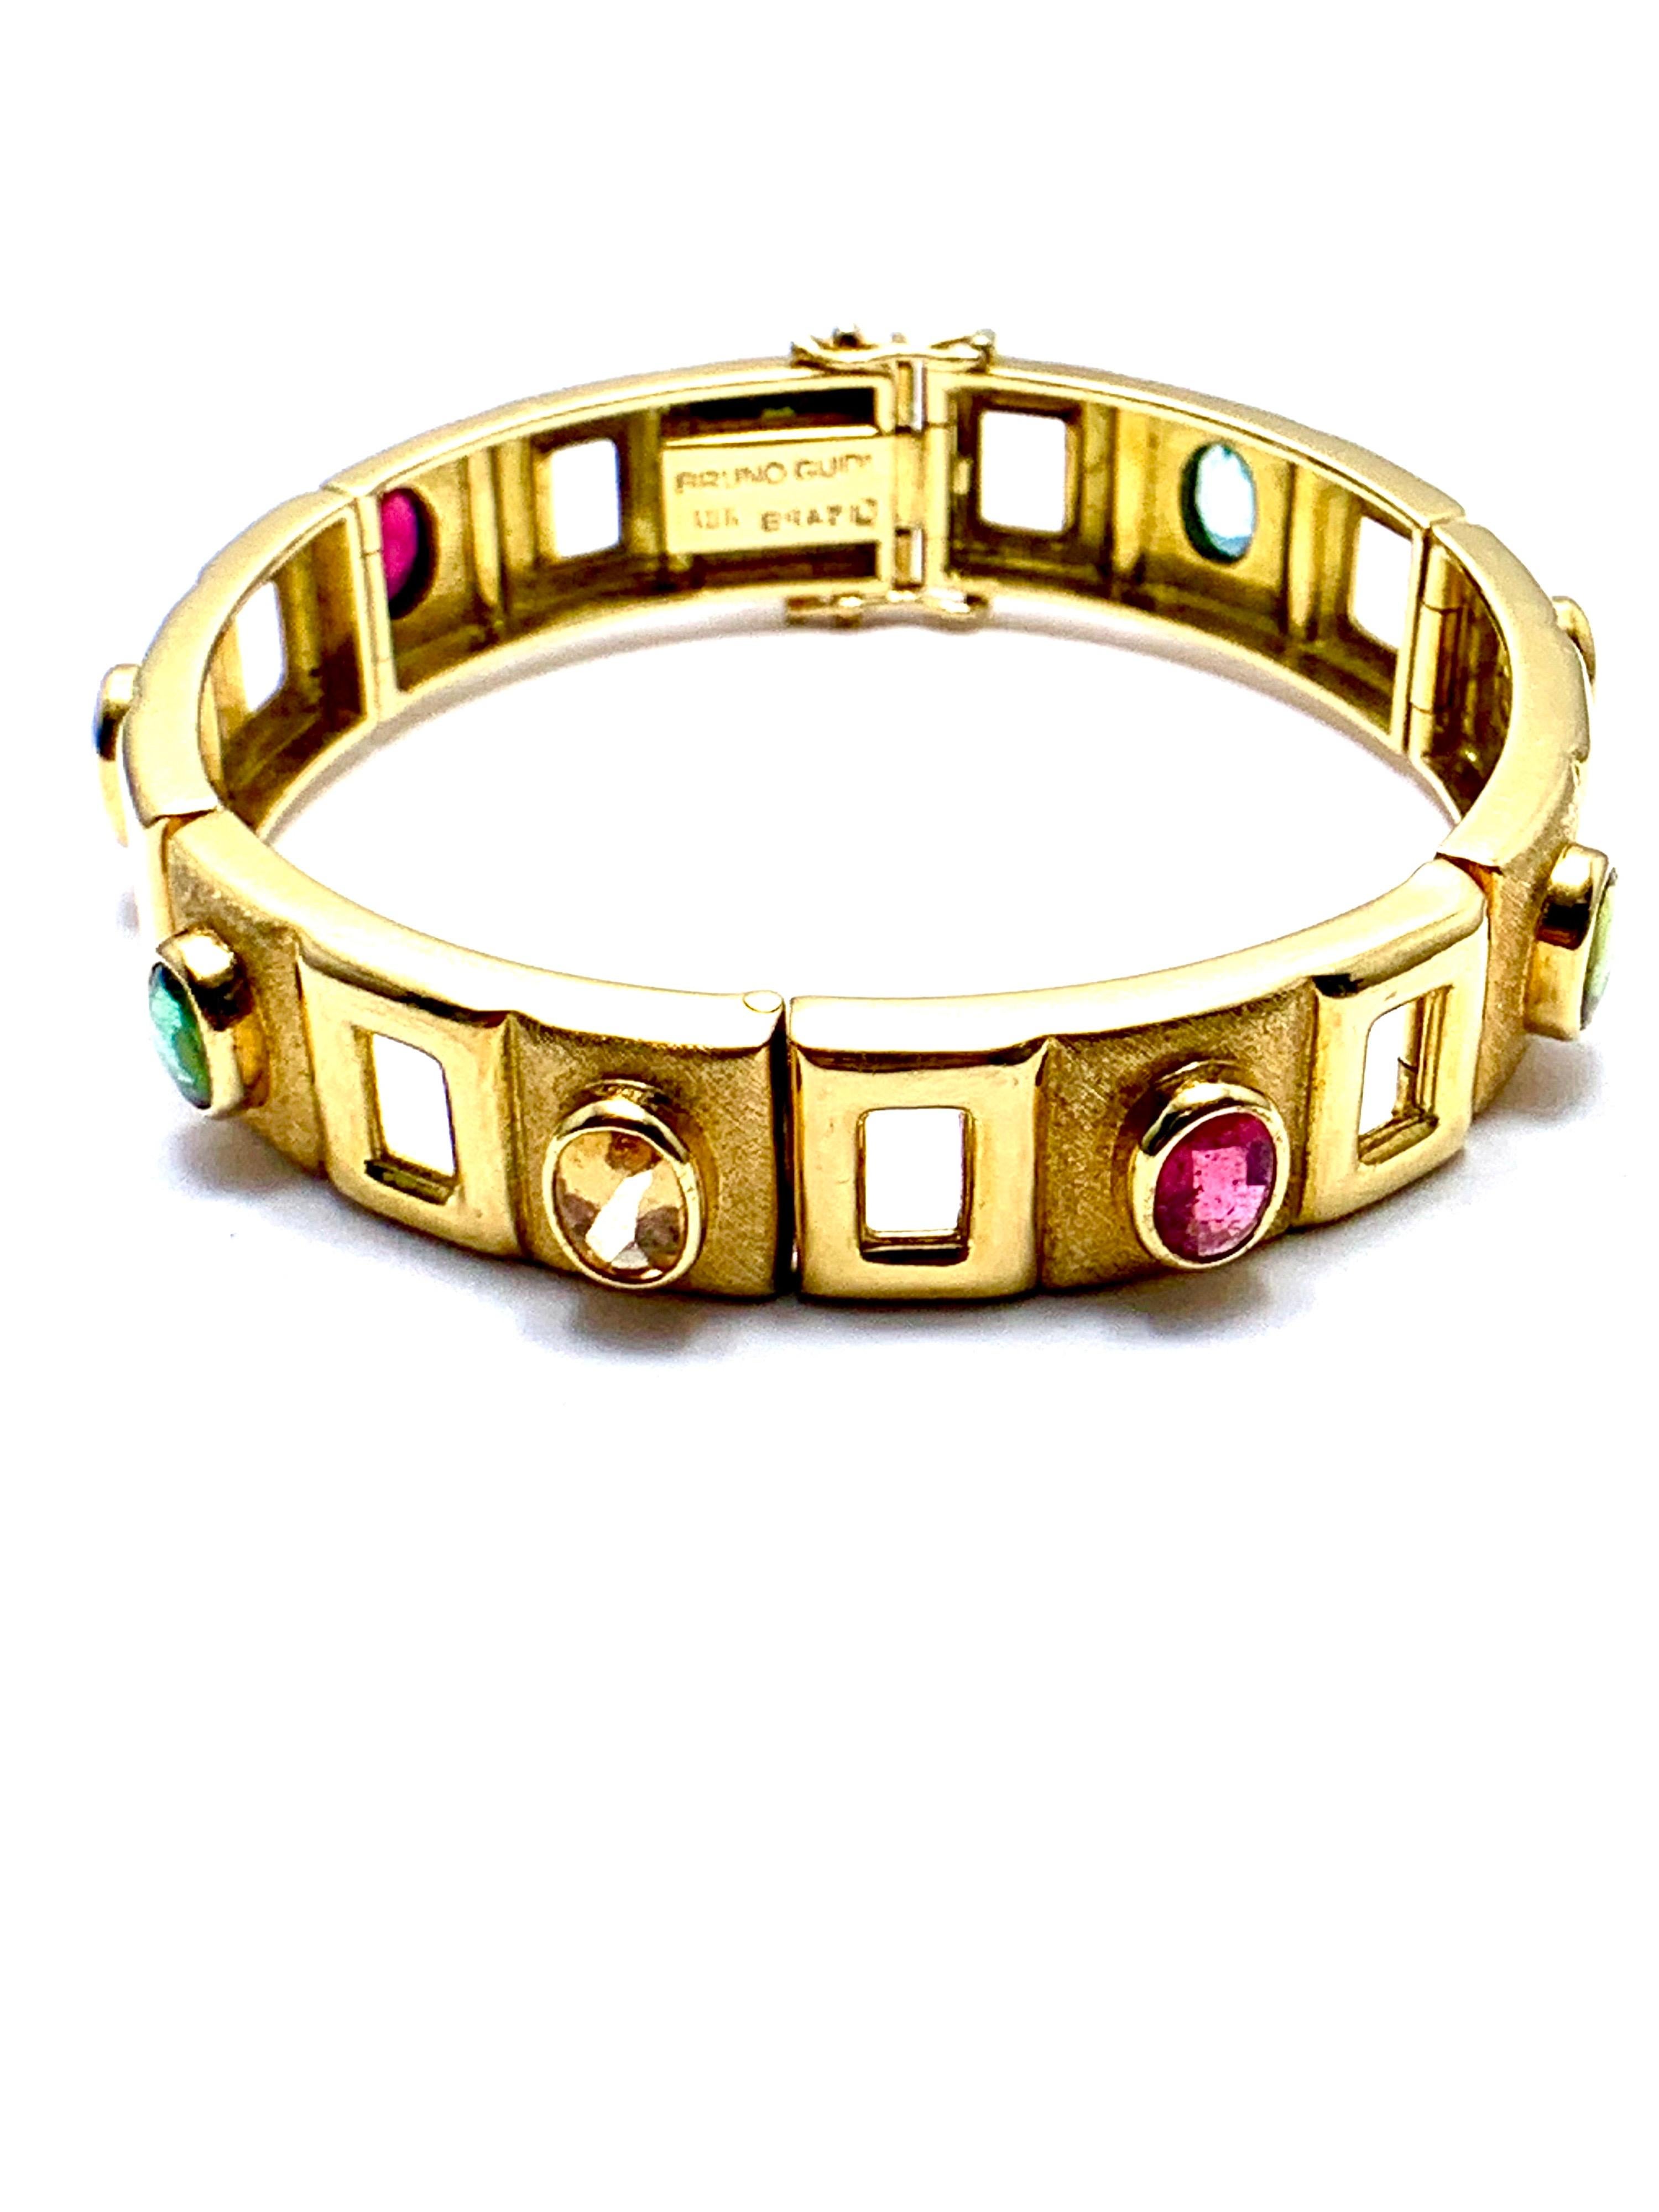 A rare to find Bruno Guidi Retro 18K yellow gold bracelet.  The bracelet is designed with oval cabochon gemstones individually bezel set in brushed rectangular links alternating with openwork polished links.  The gemstones used are Aquamarine,